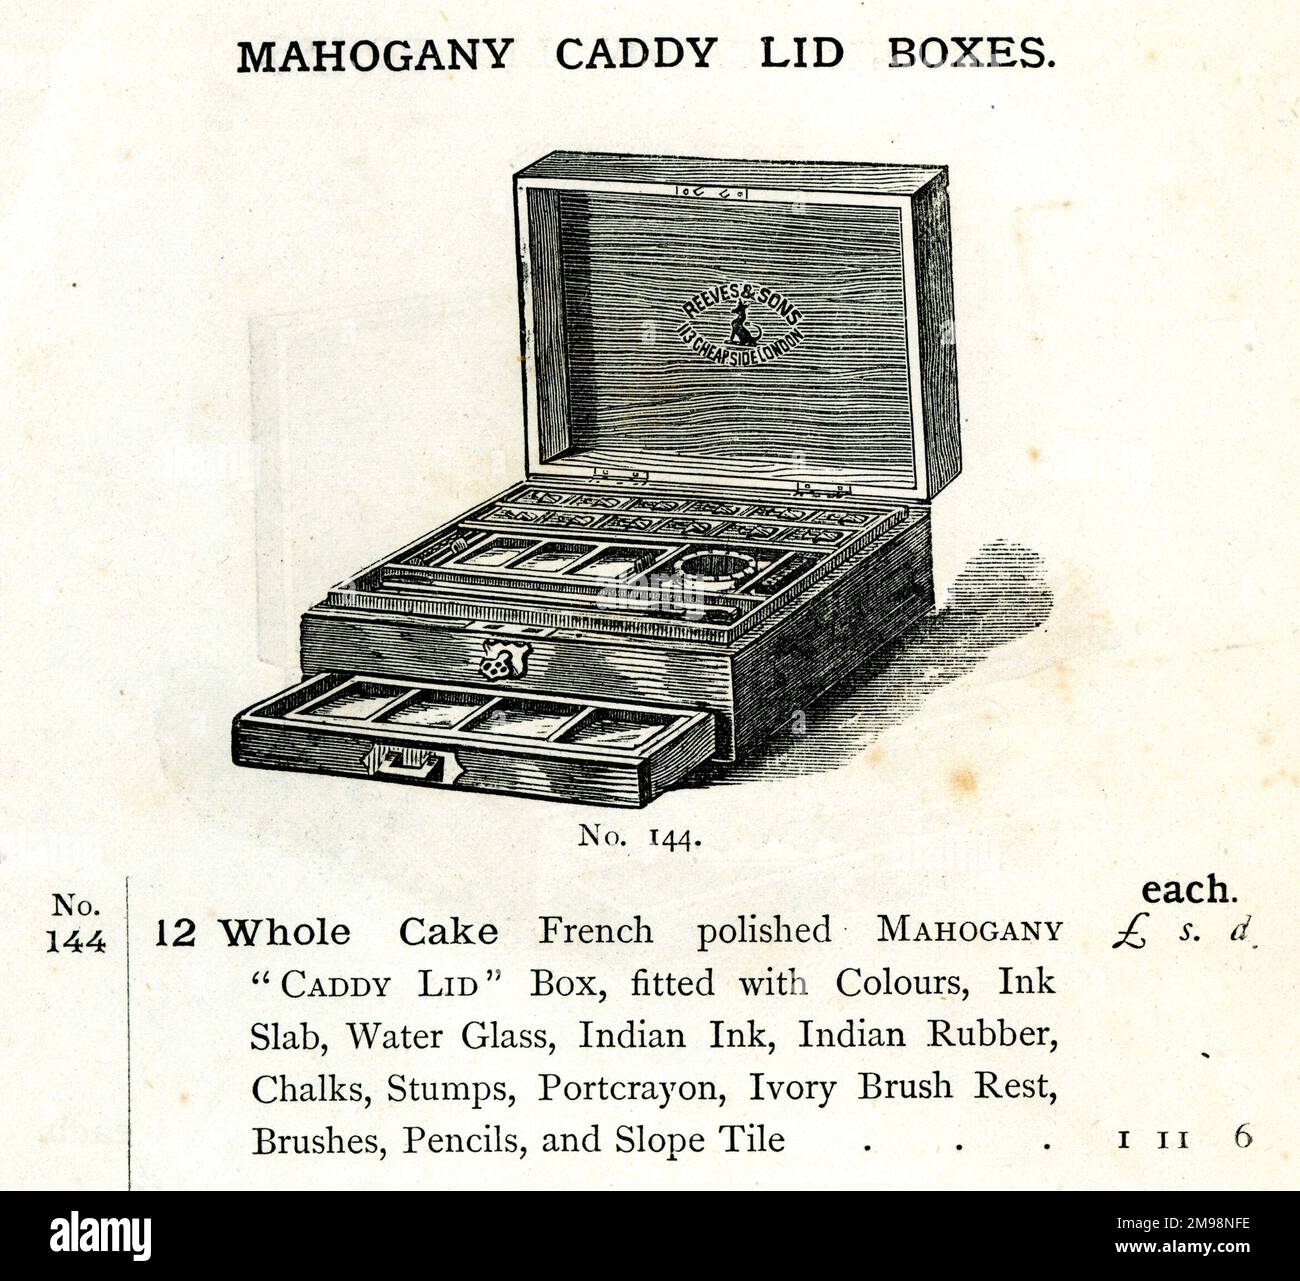 Mahogany Caddy Lid Box containing paints, inks and other items. Stock Photo